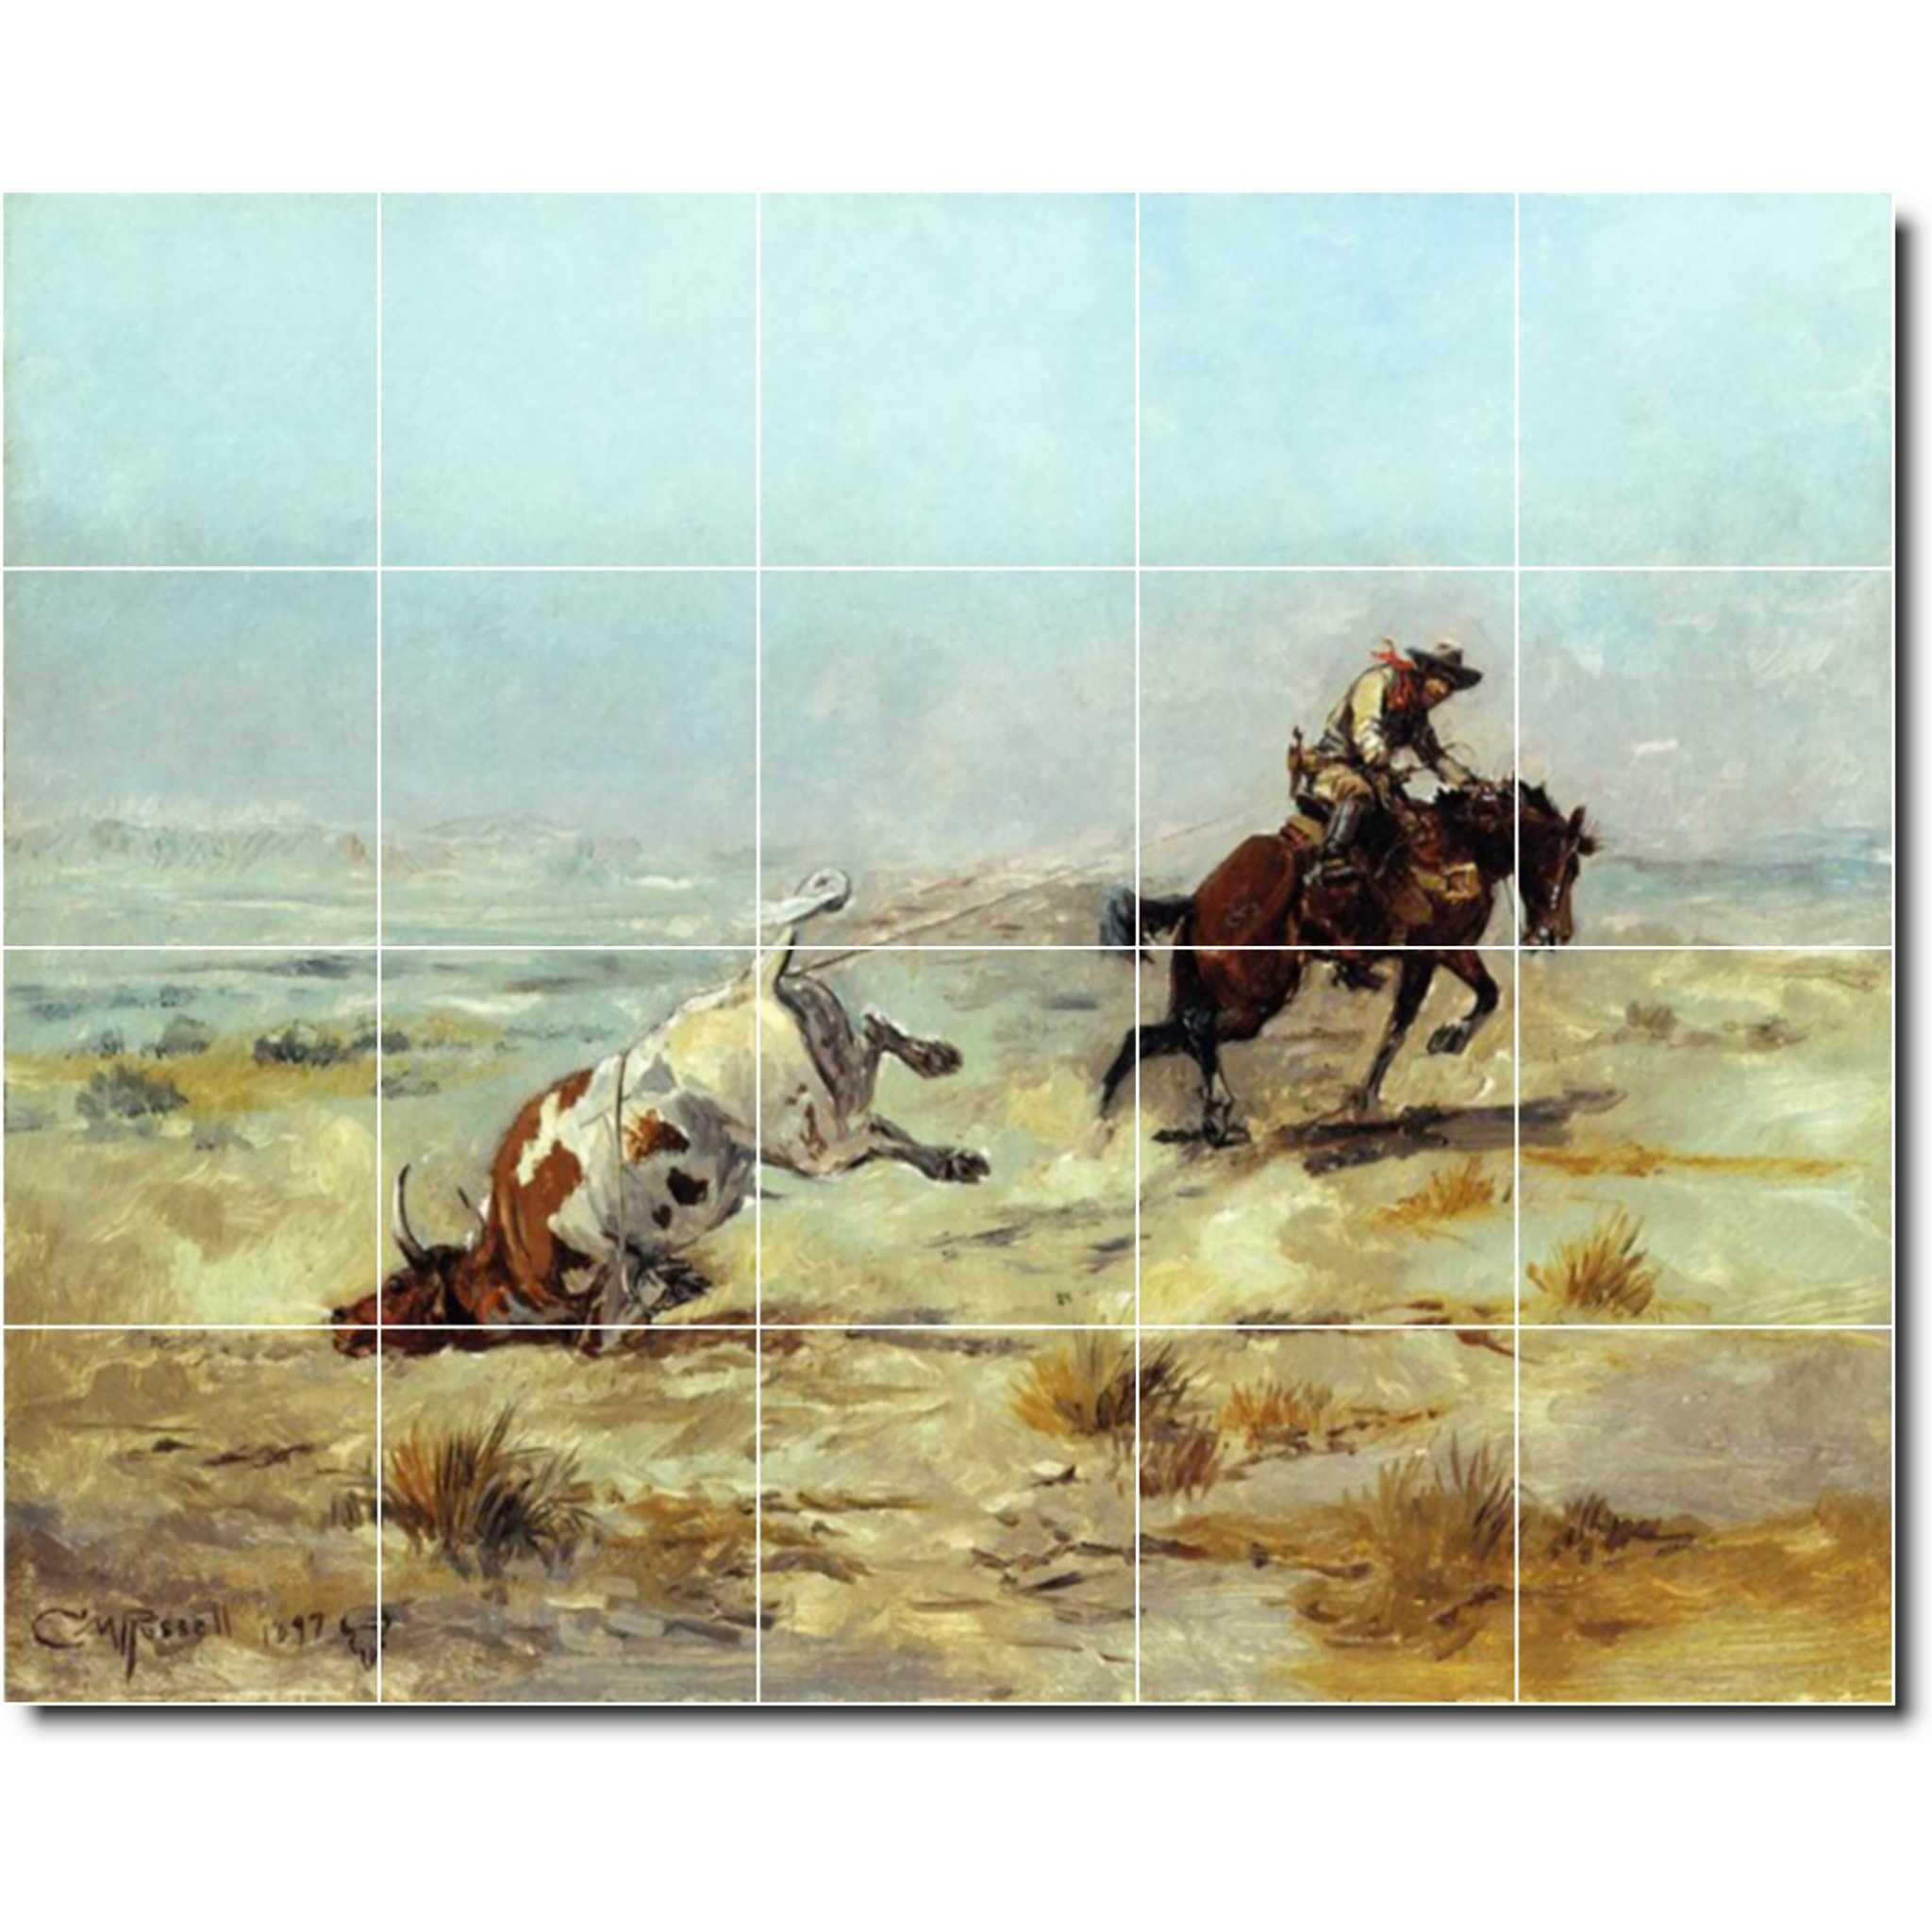 charles russell western painting ceramic tile mural p07775